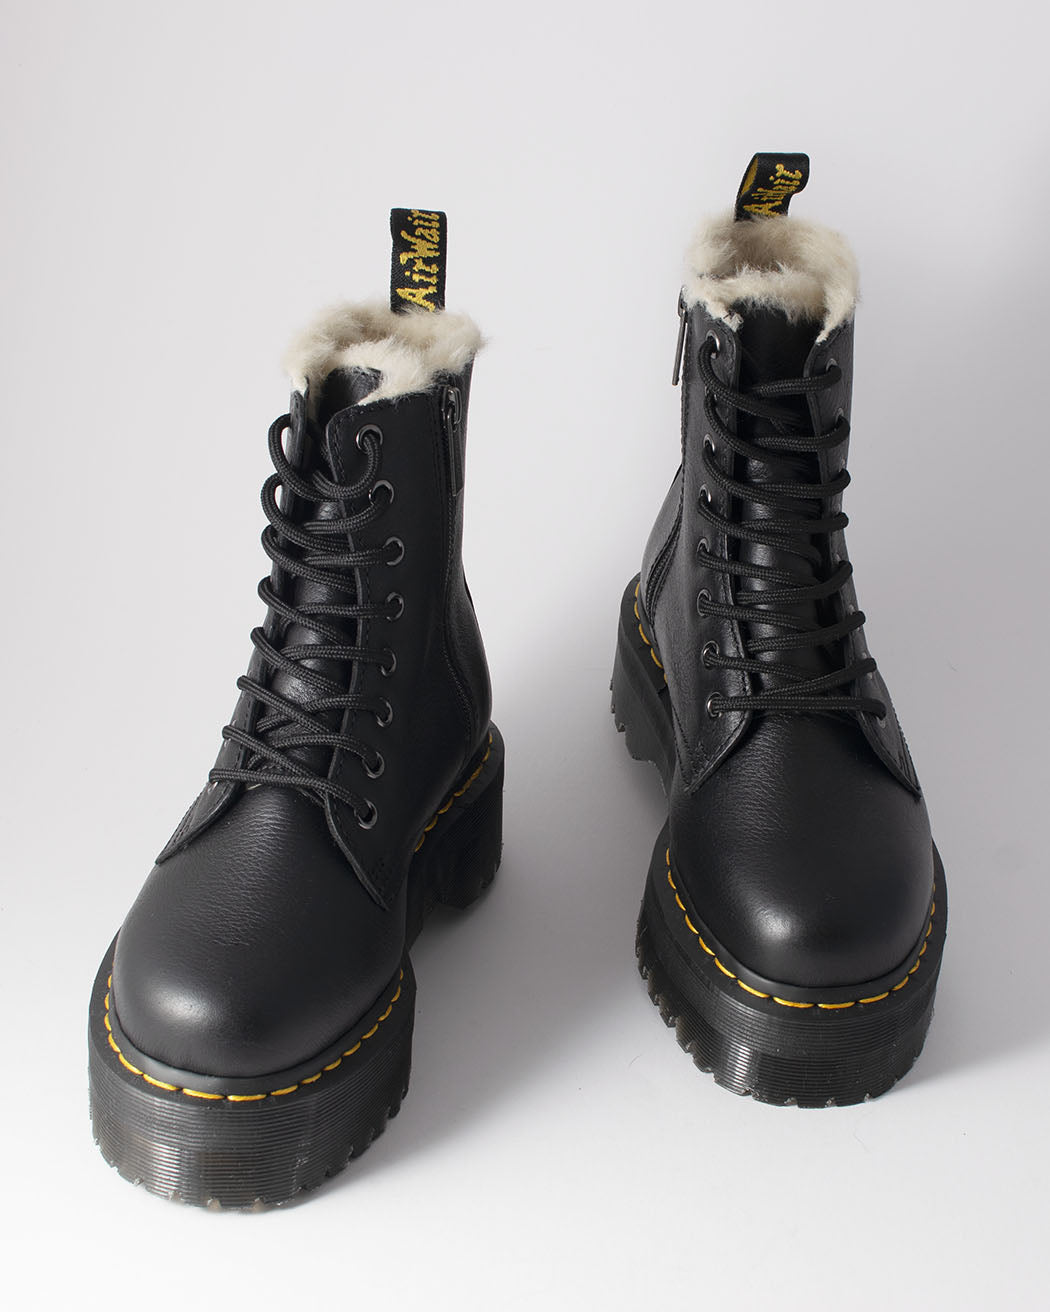 Martens - discontinued dr Boots - discontinued